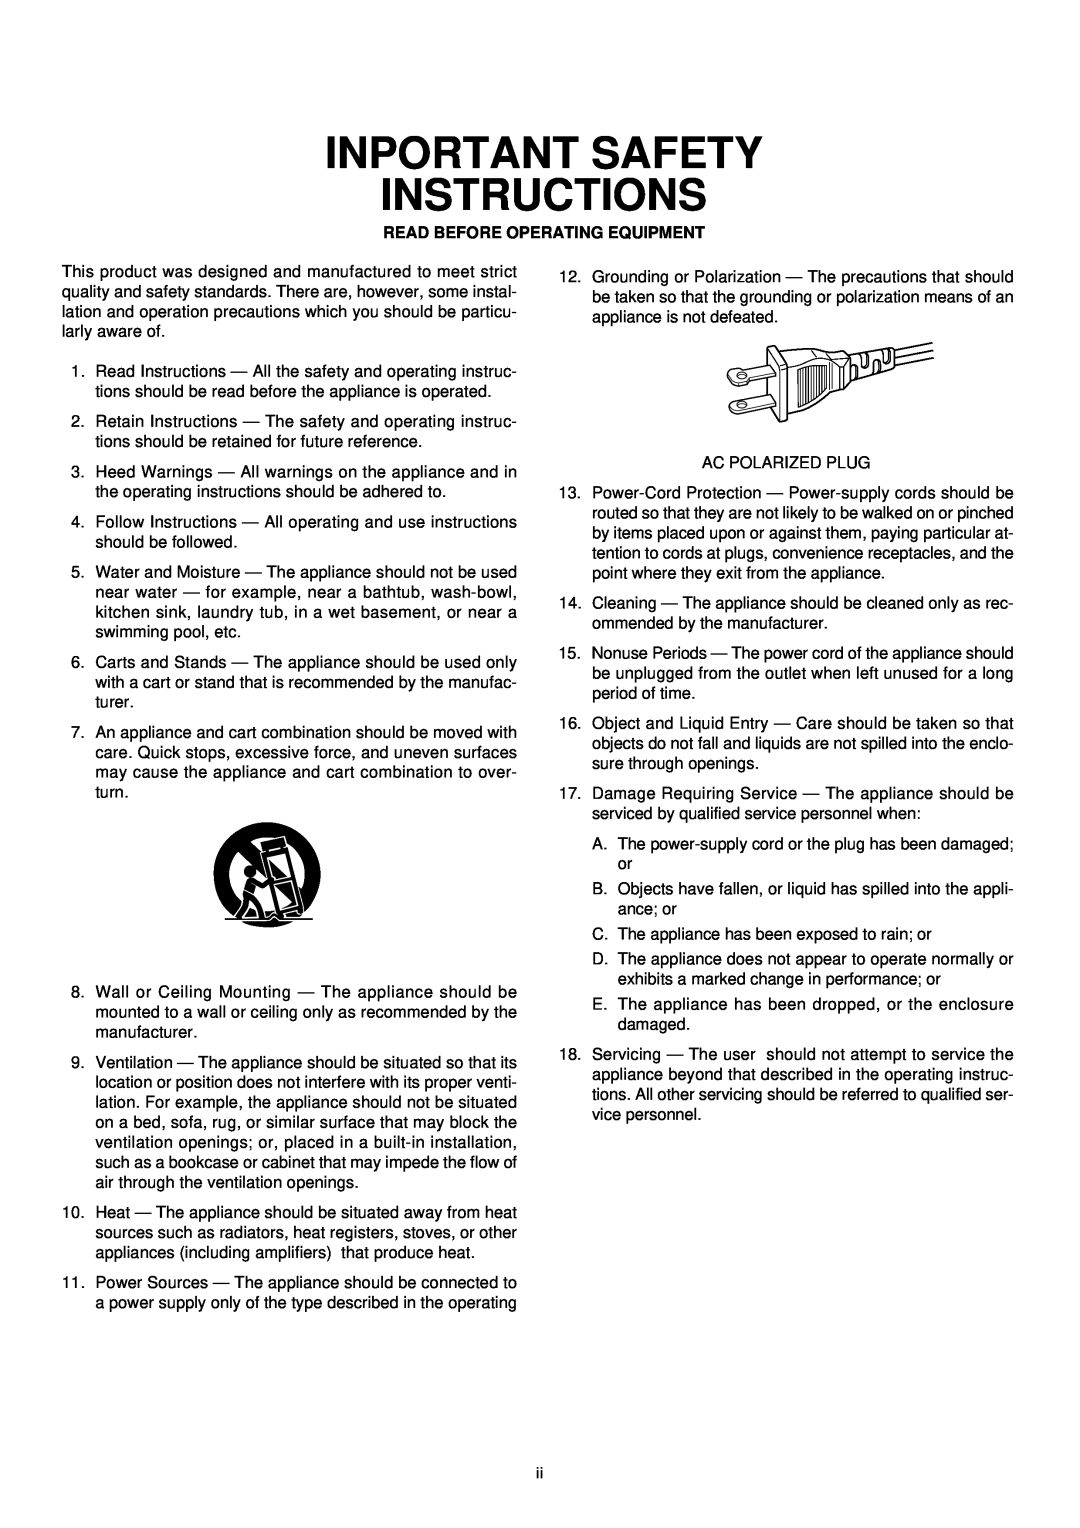 Marantz DR6050 manual Inportant Safety Instructions, Read Before Operating Equipment 